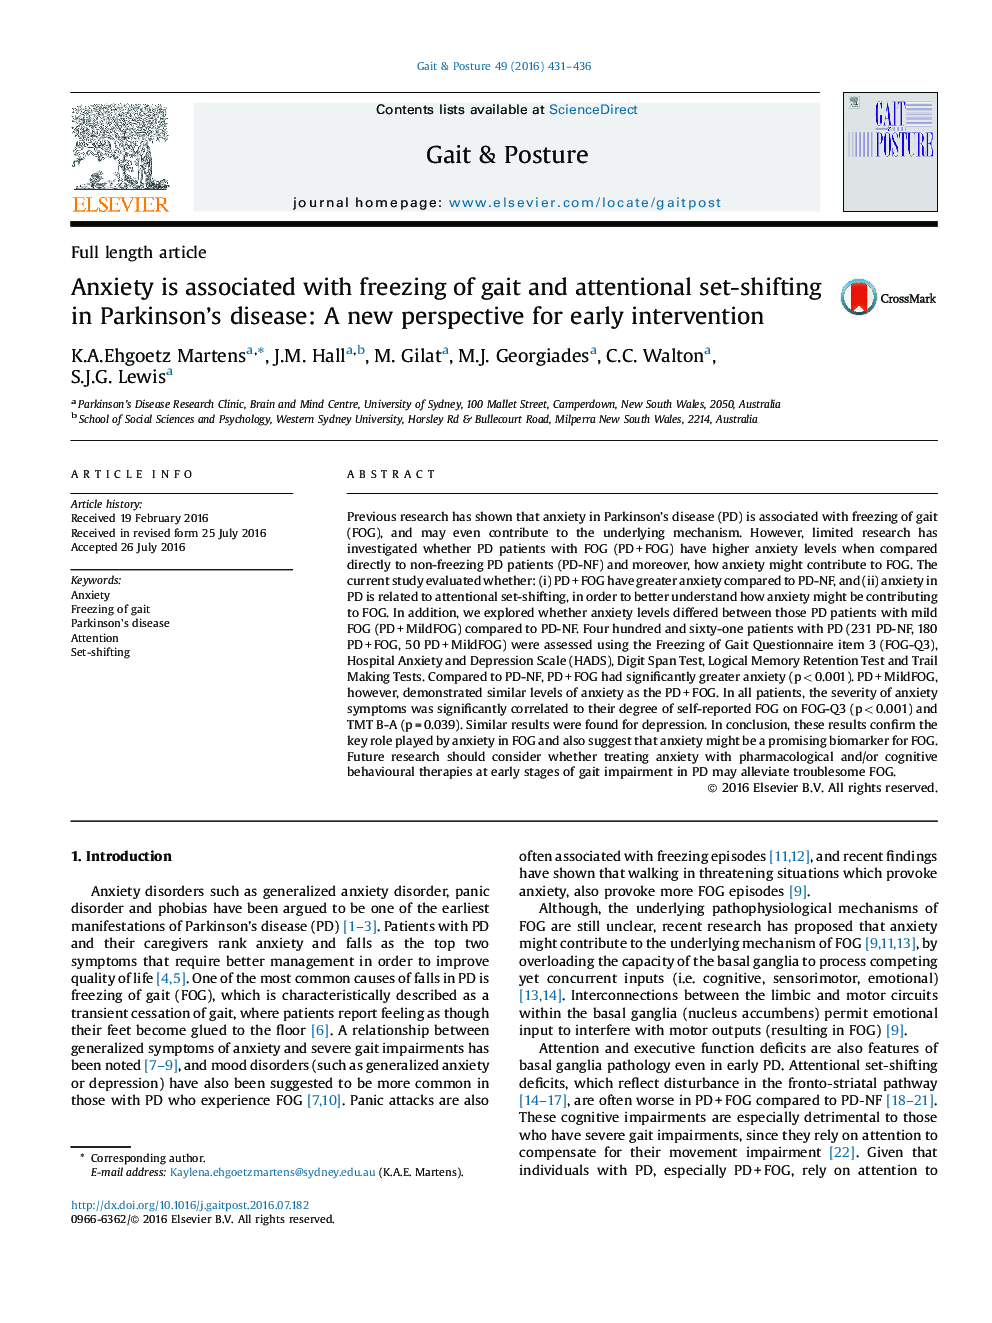 Anxiety is associated with freezing of gait and attentional set-shifting in Parkinson's disease: A new perspective for early intervention